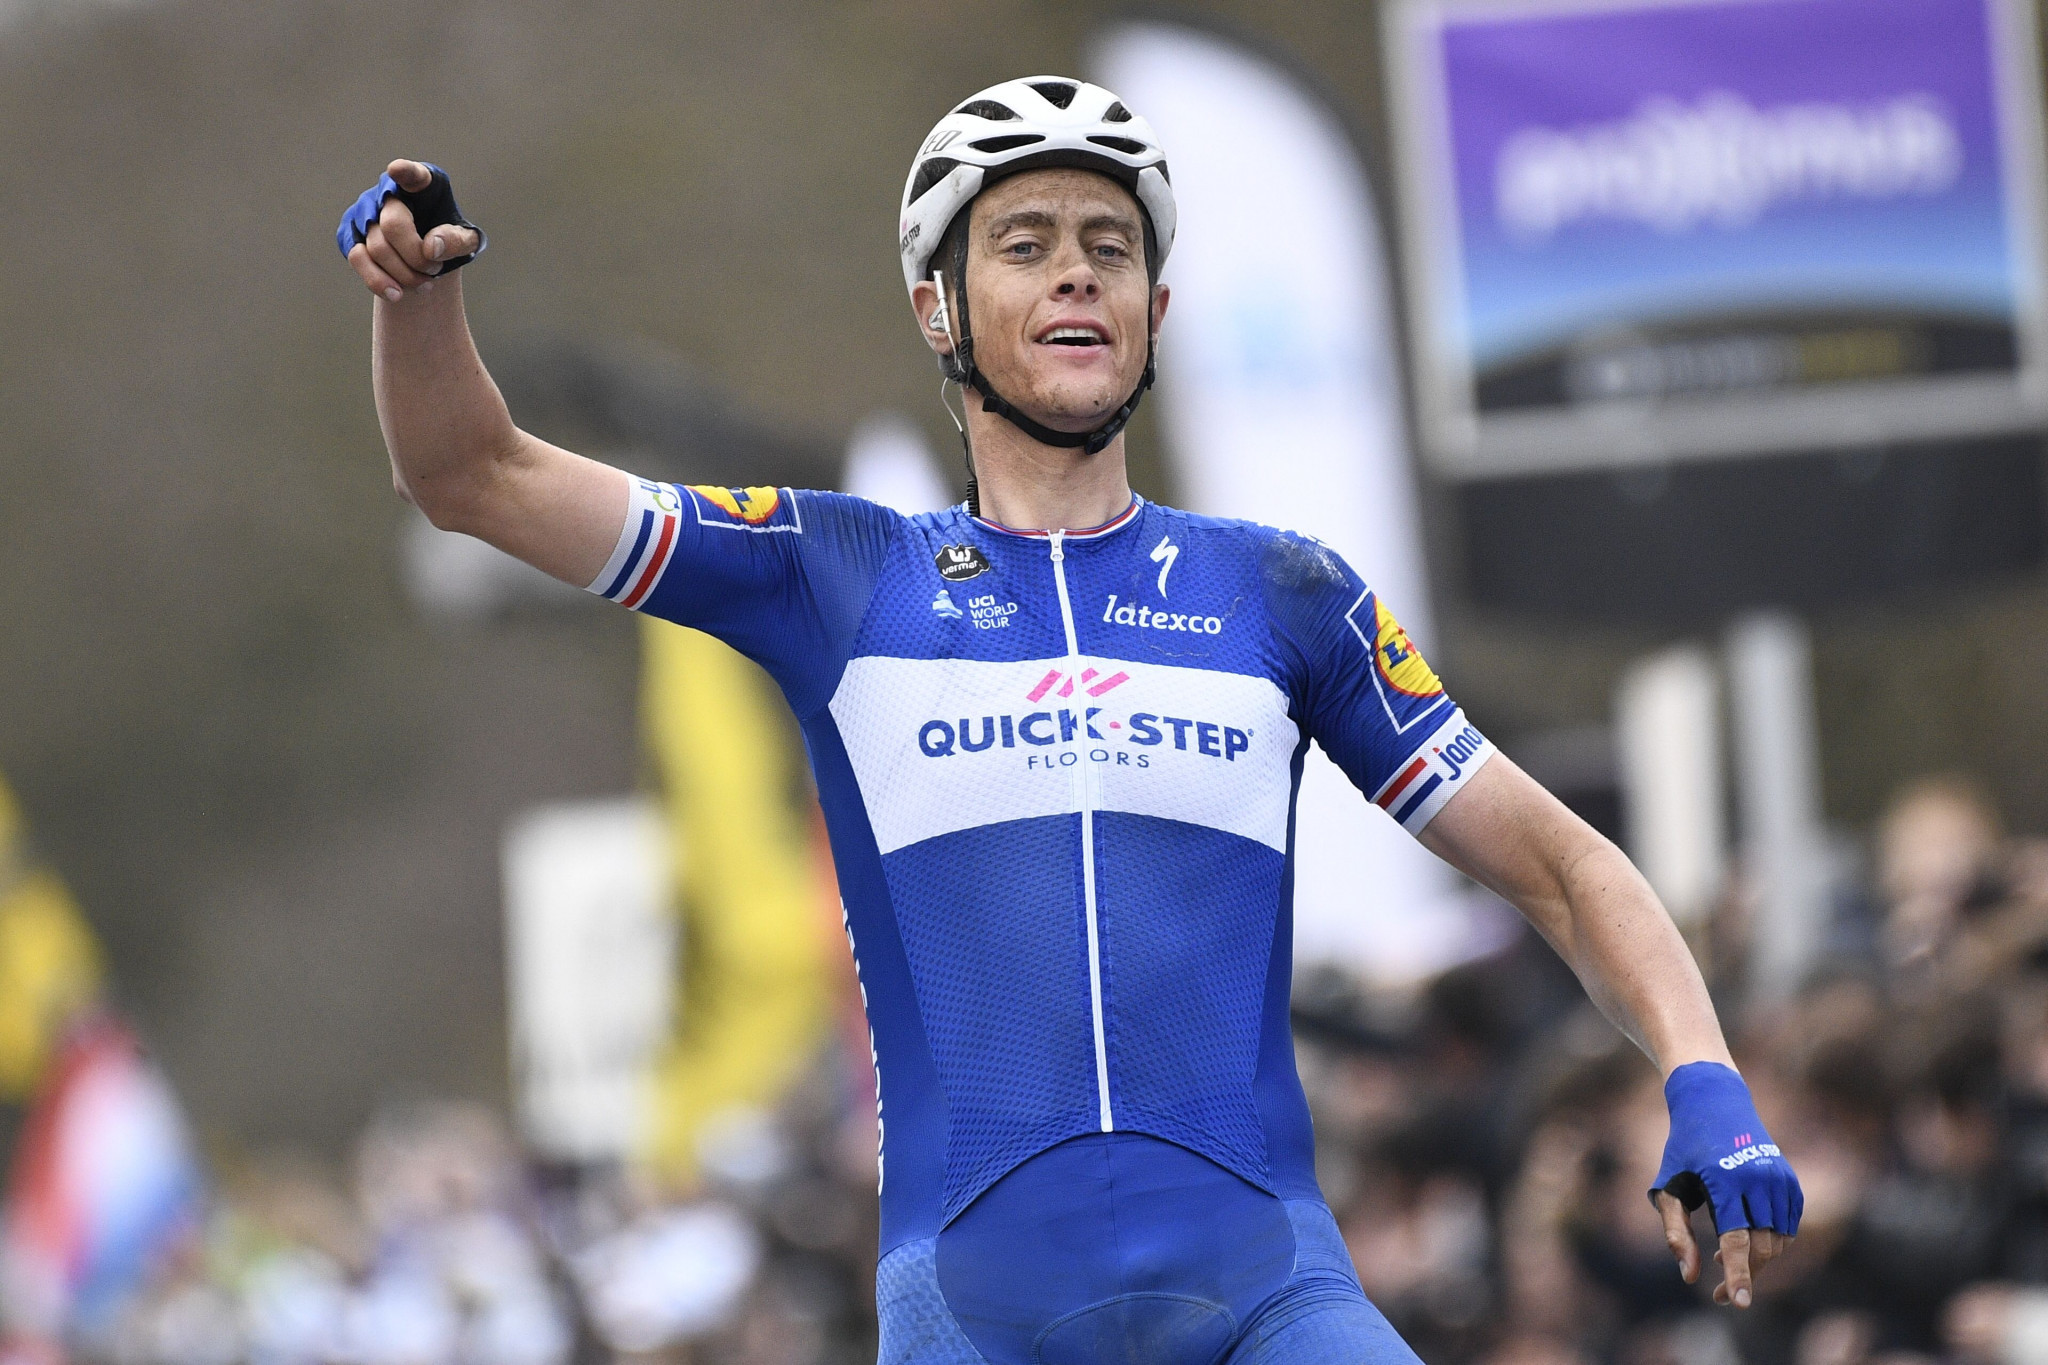 Terpstra clinches rare Dutch Tour of Flanders victory